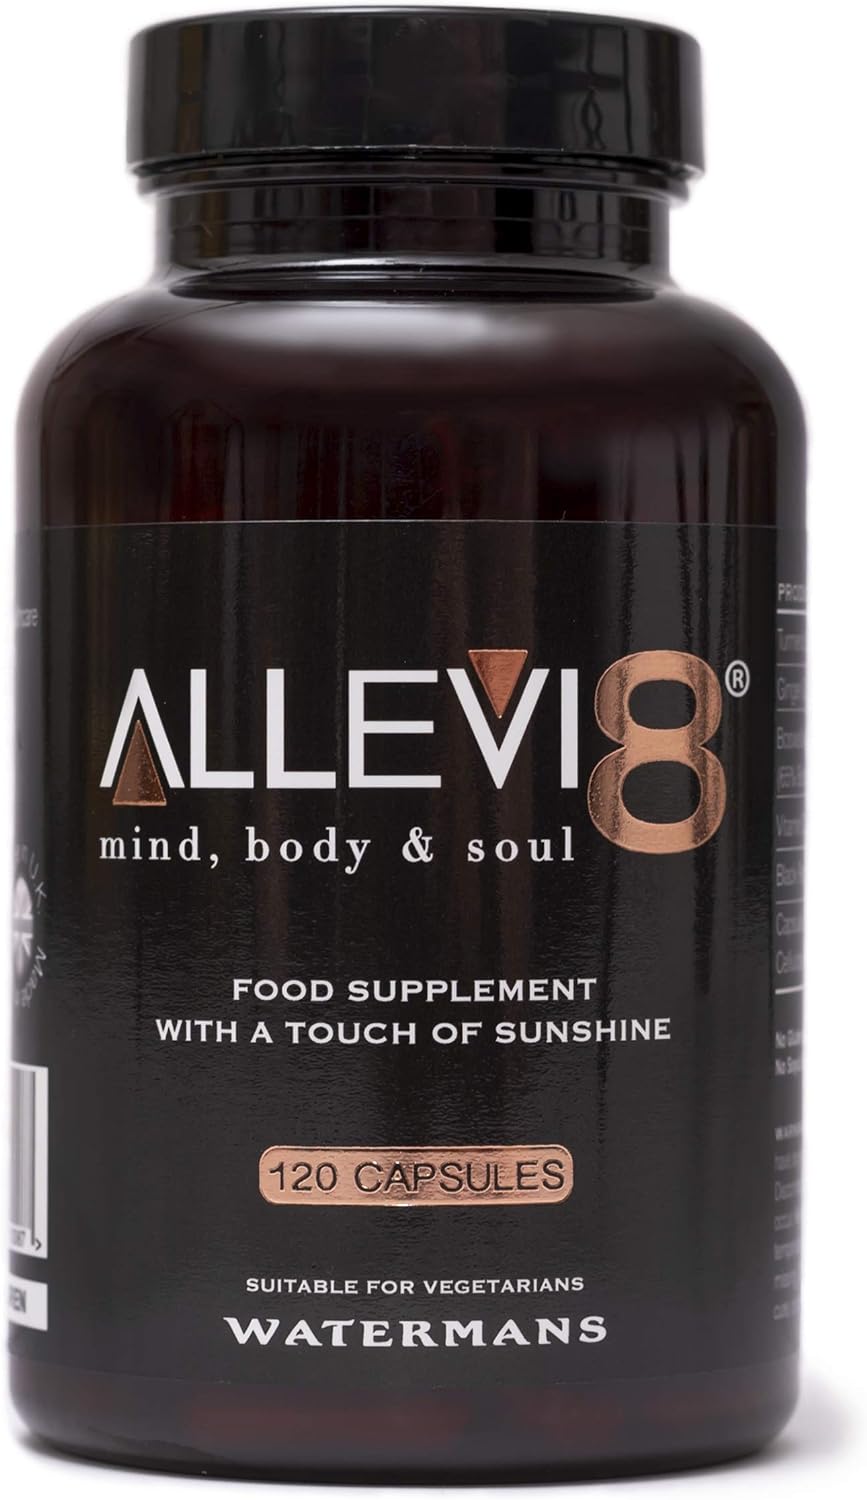 Allevi8 - Ayurvedic Medicine, Frankincense, Turmeric, Ginger, Black Pepper, Vitamin D3. 2 Months Supply in one tub. These Powerful Herbs were Used in Biblical Times